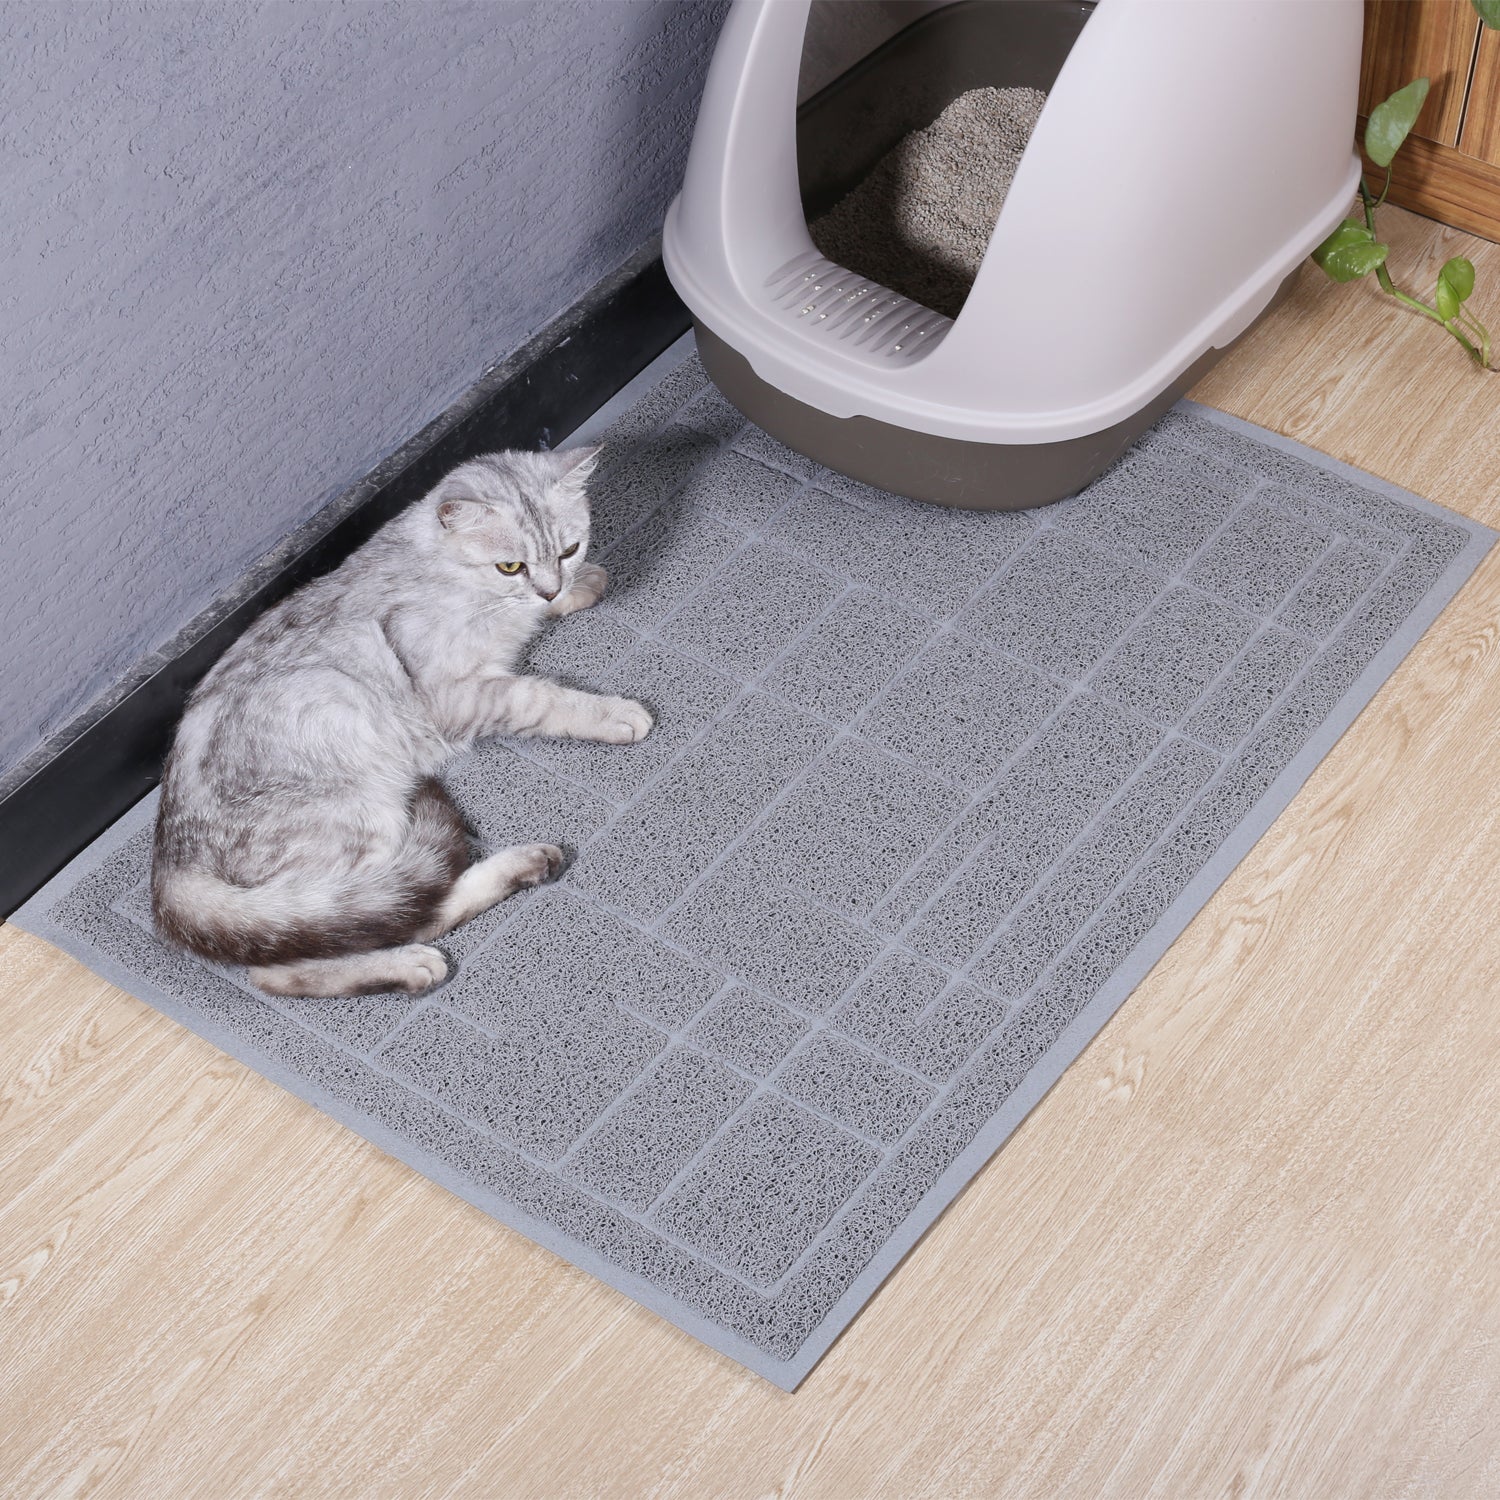 Vivaglory Cat Litter Mats, 31× 20 Large or 35× 25 Extra Large Supe –  VIVAGLORY